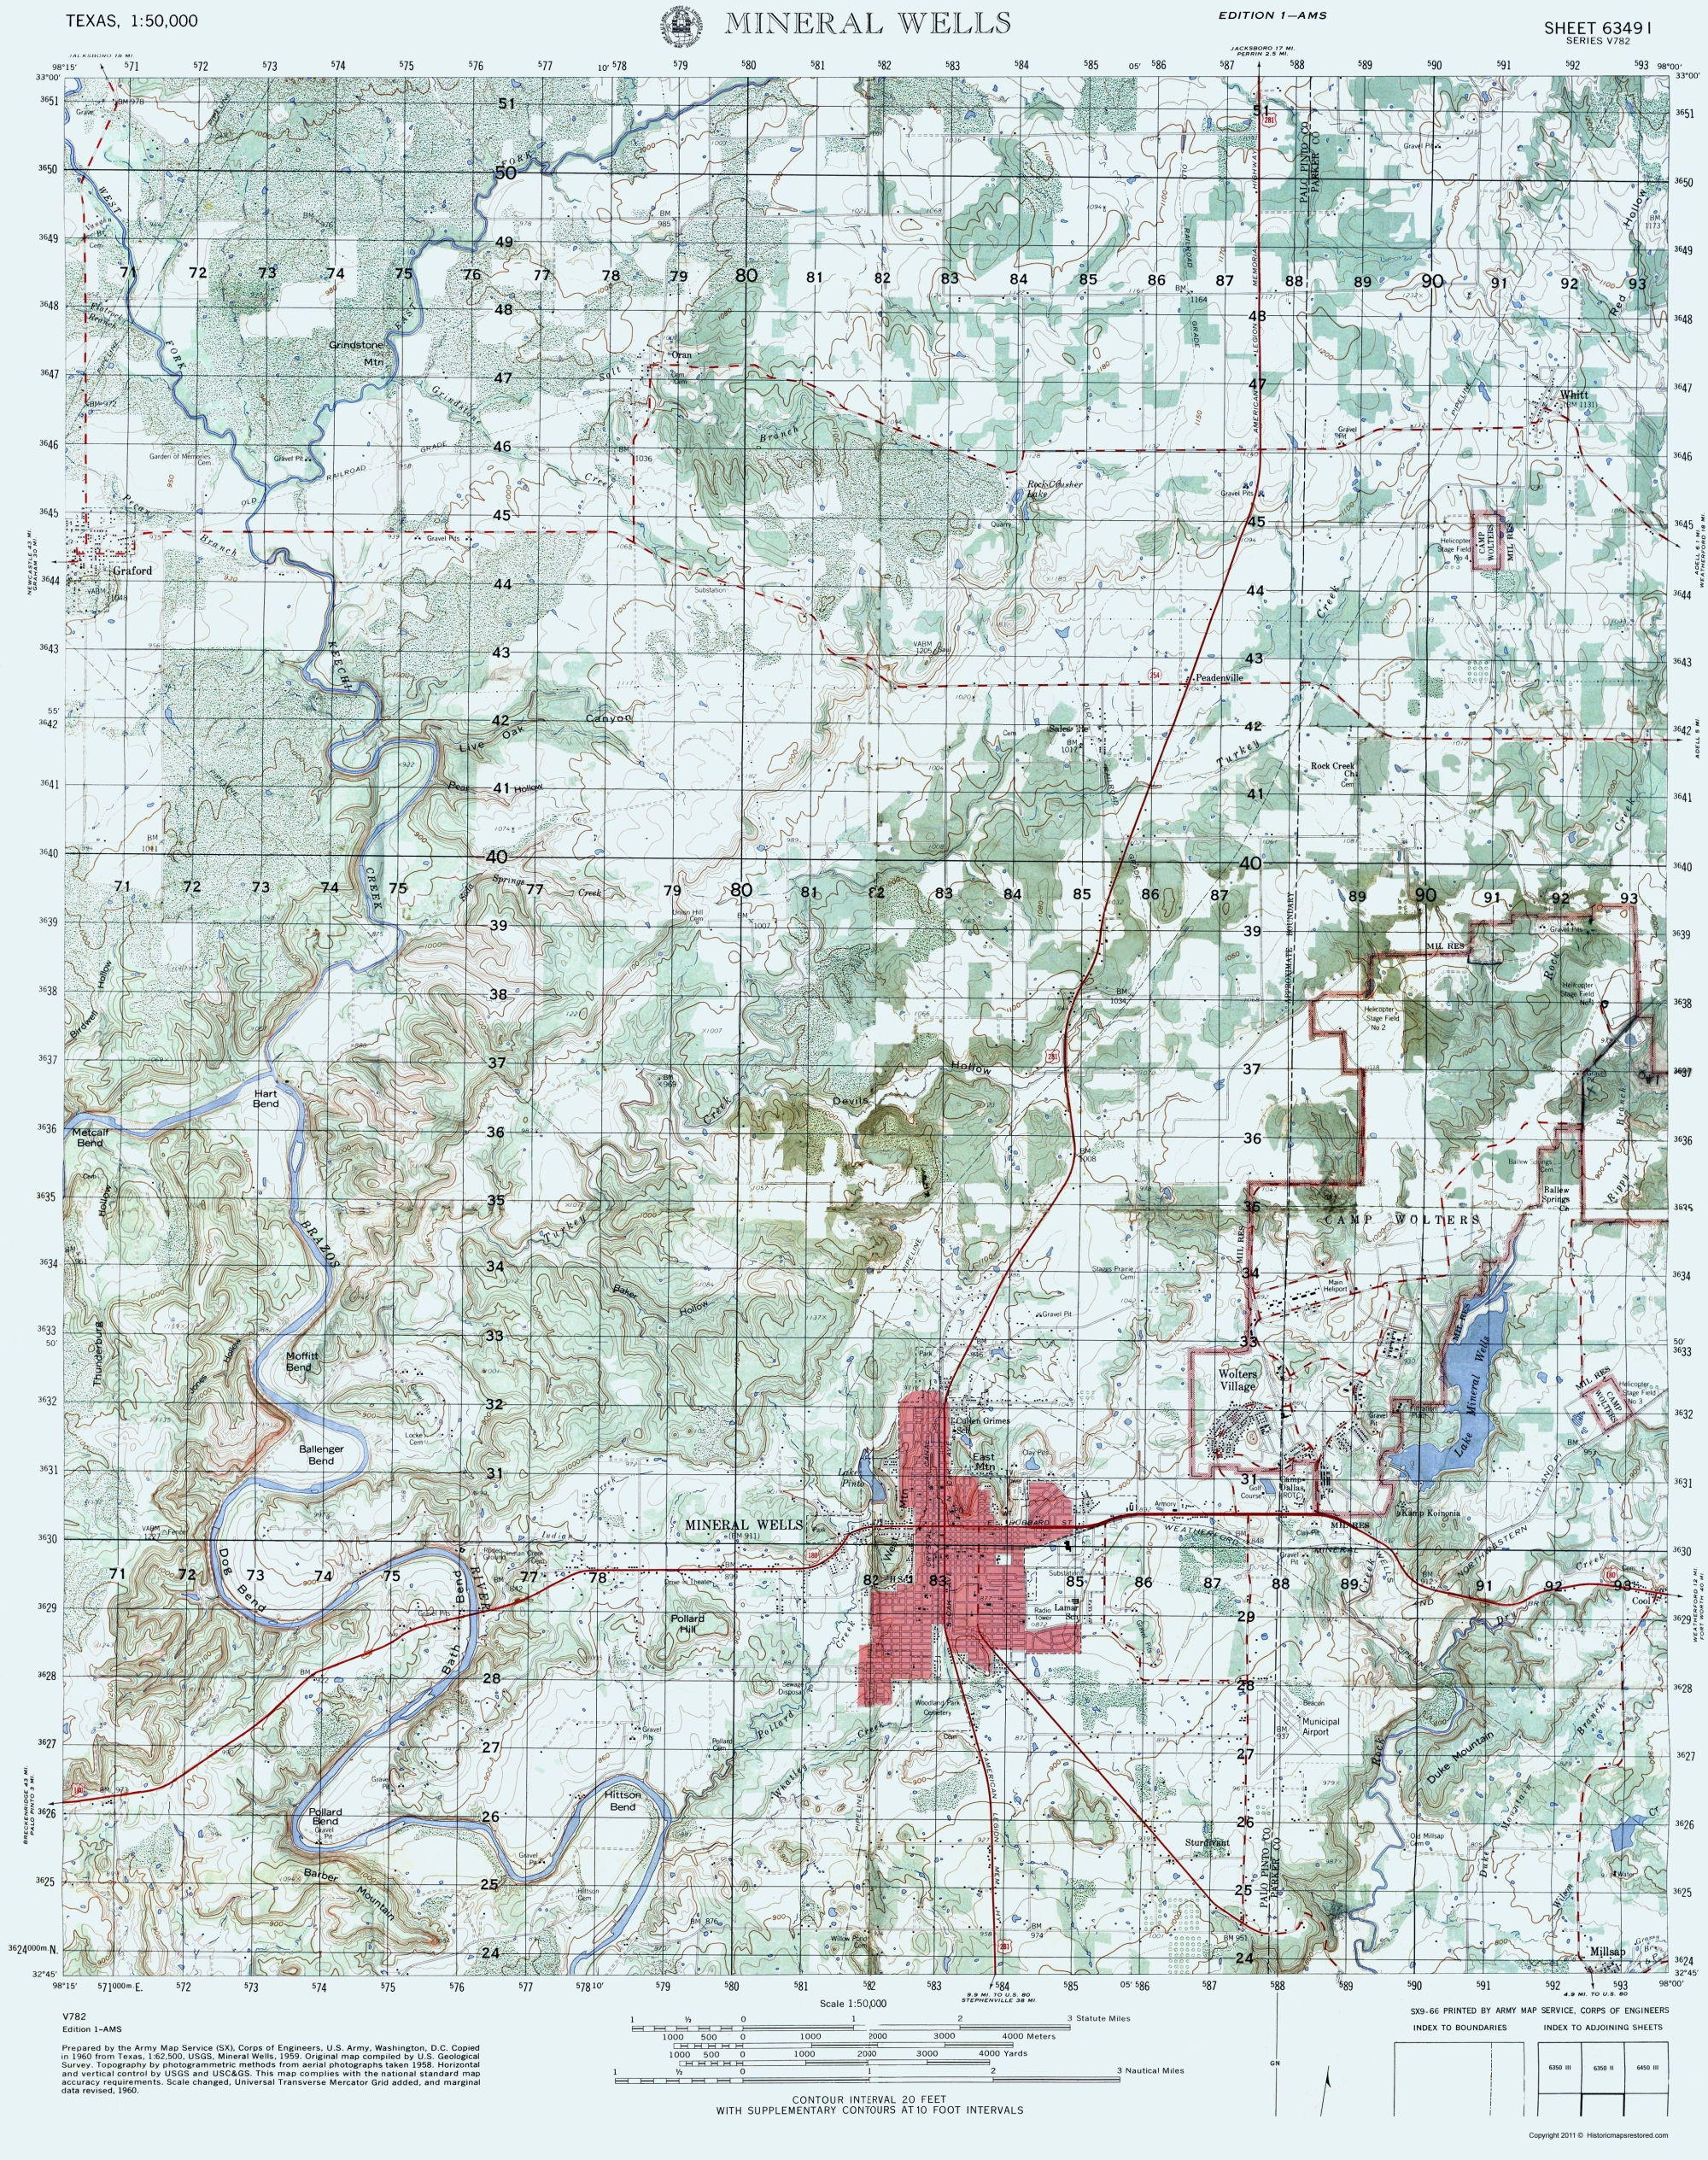 Old Topographical Map - Mineral Wells Texas 1960 - Mineral Wells Texas Map